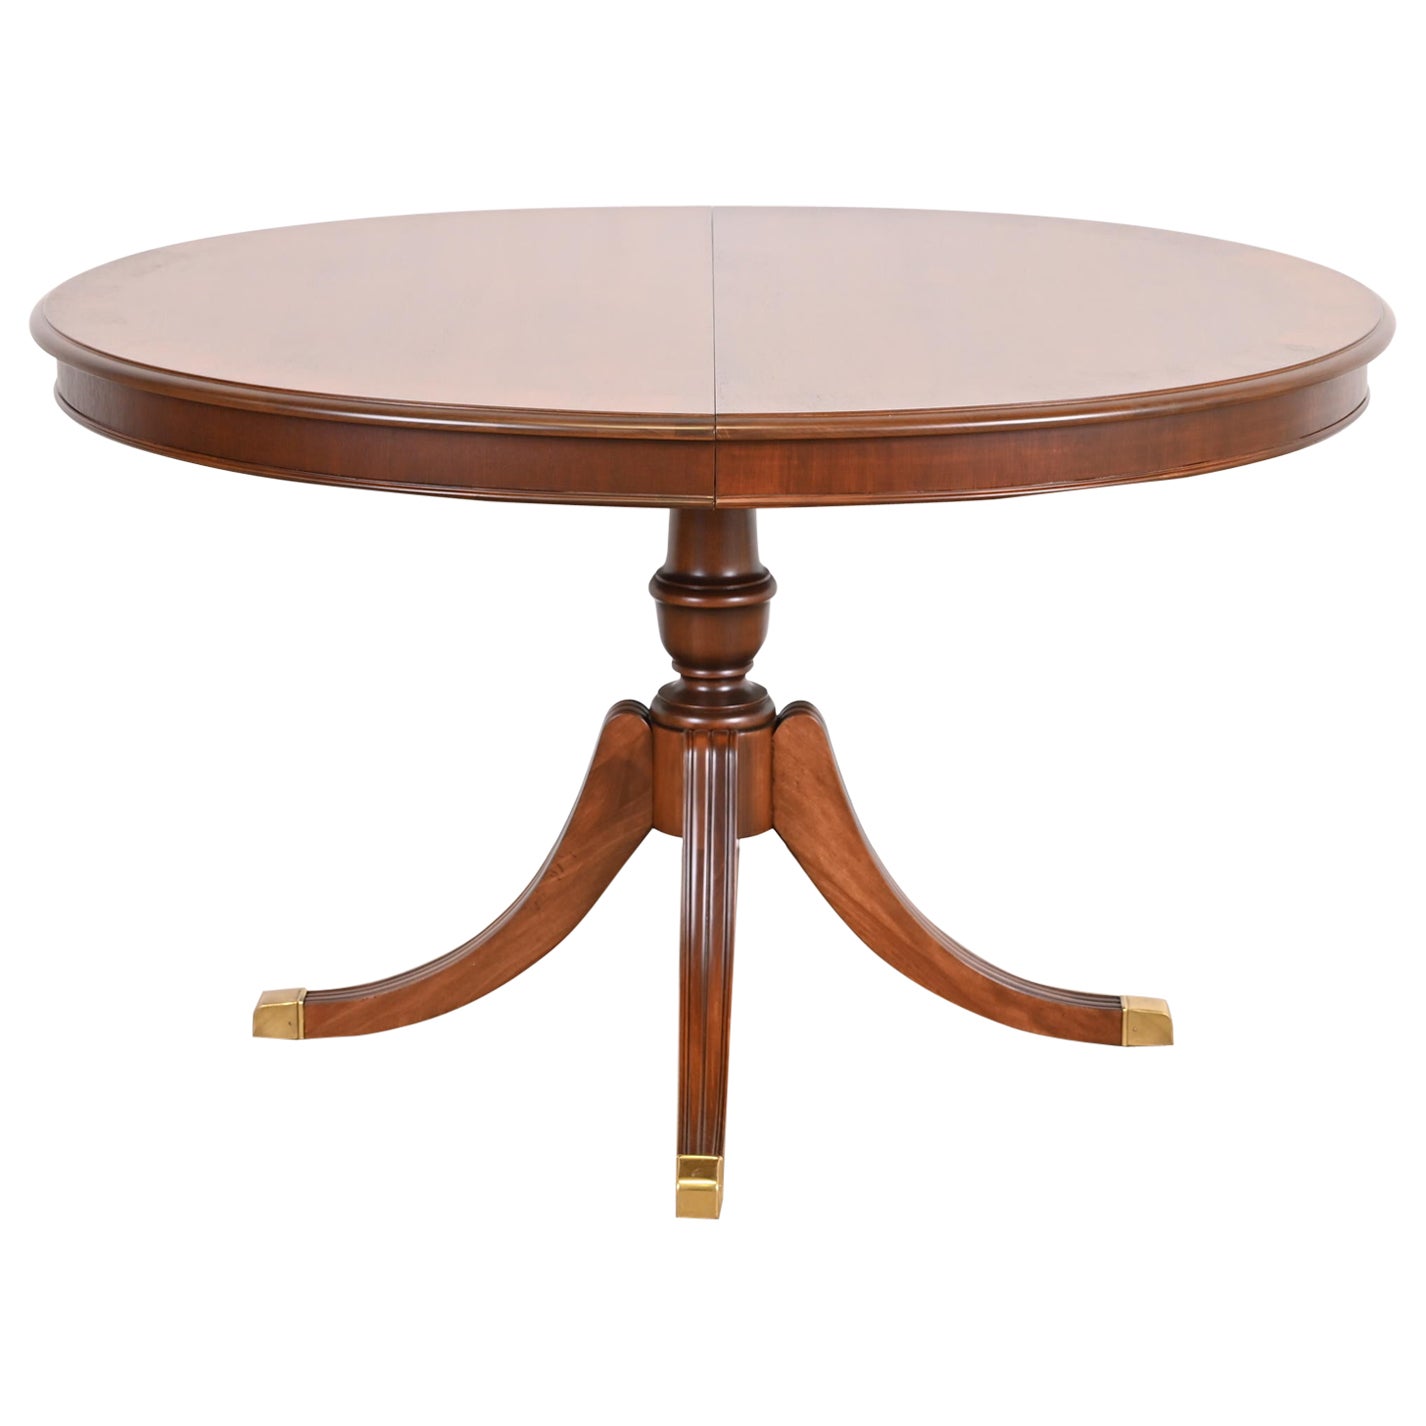 Drexel Georgian Mahogany Pedestal Extension Dining Table, Newly Refinished